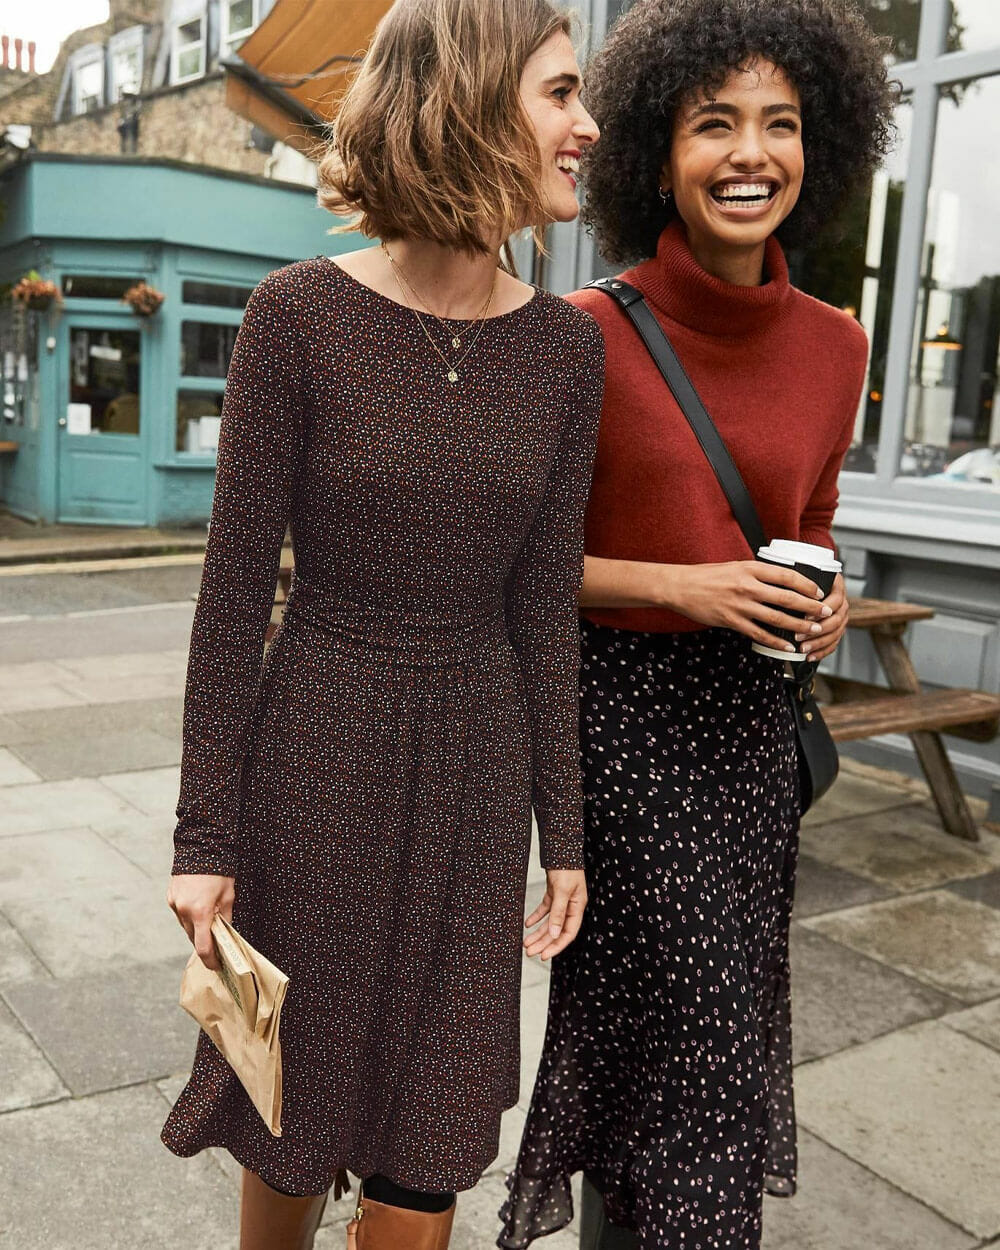 Boden ethical clothing brand